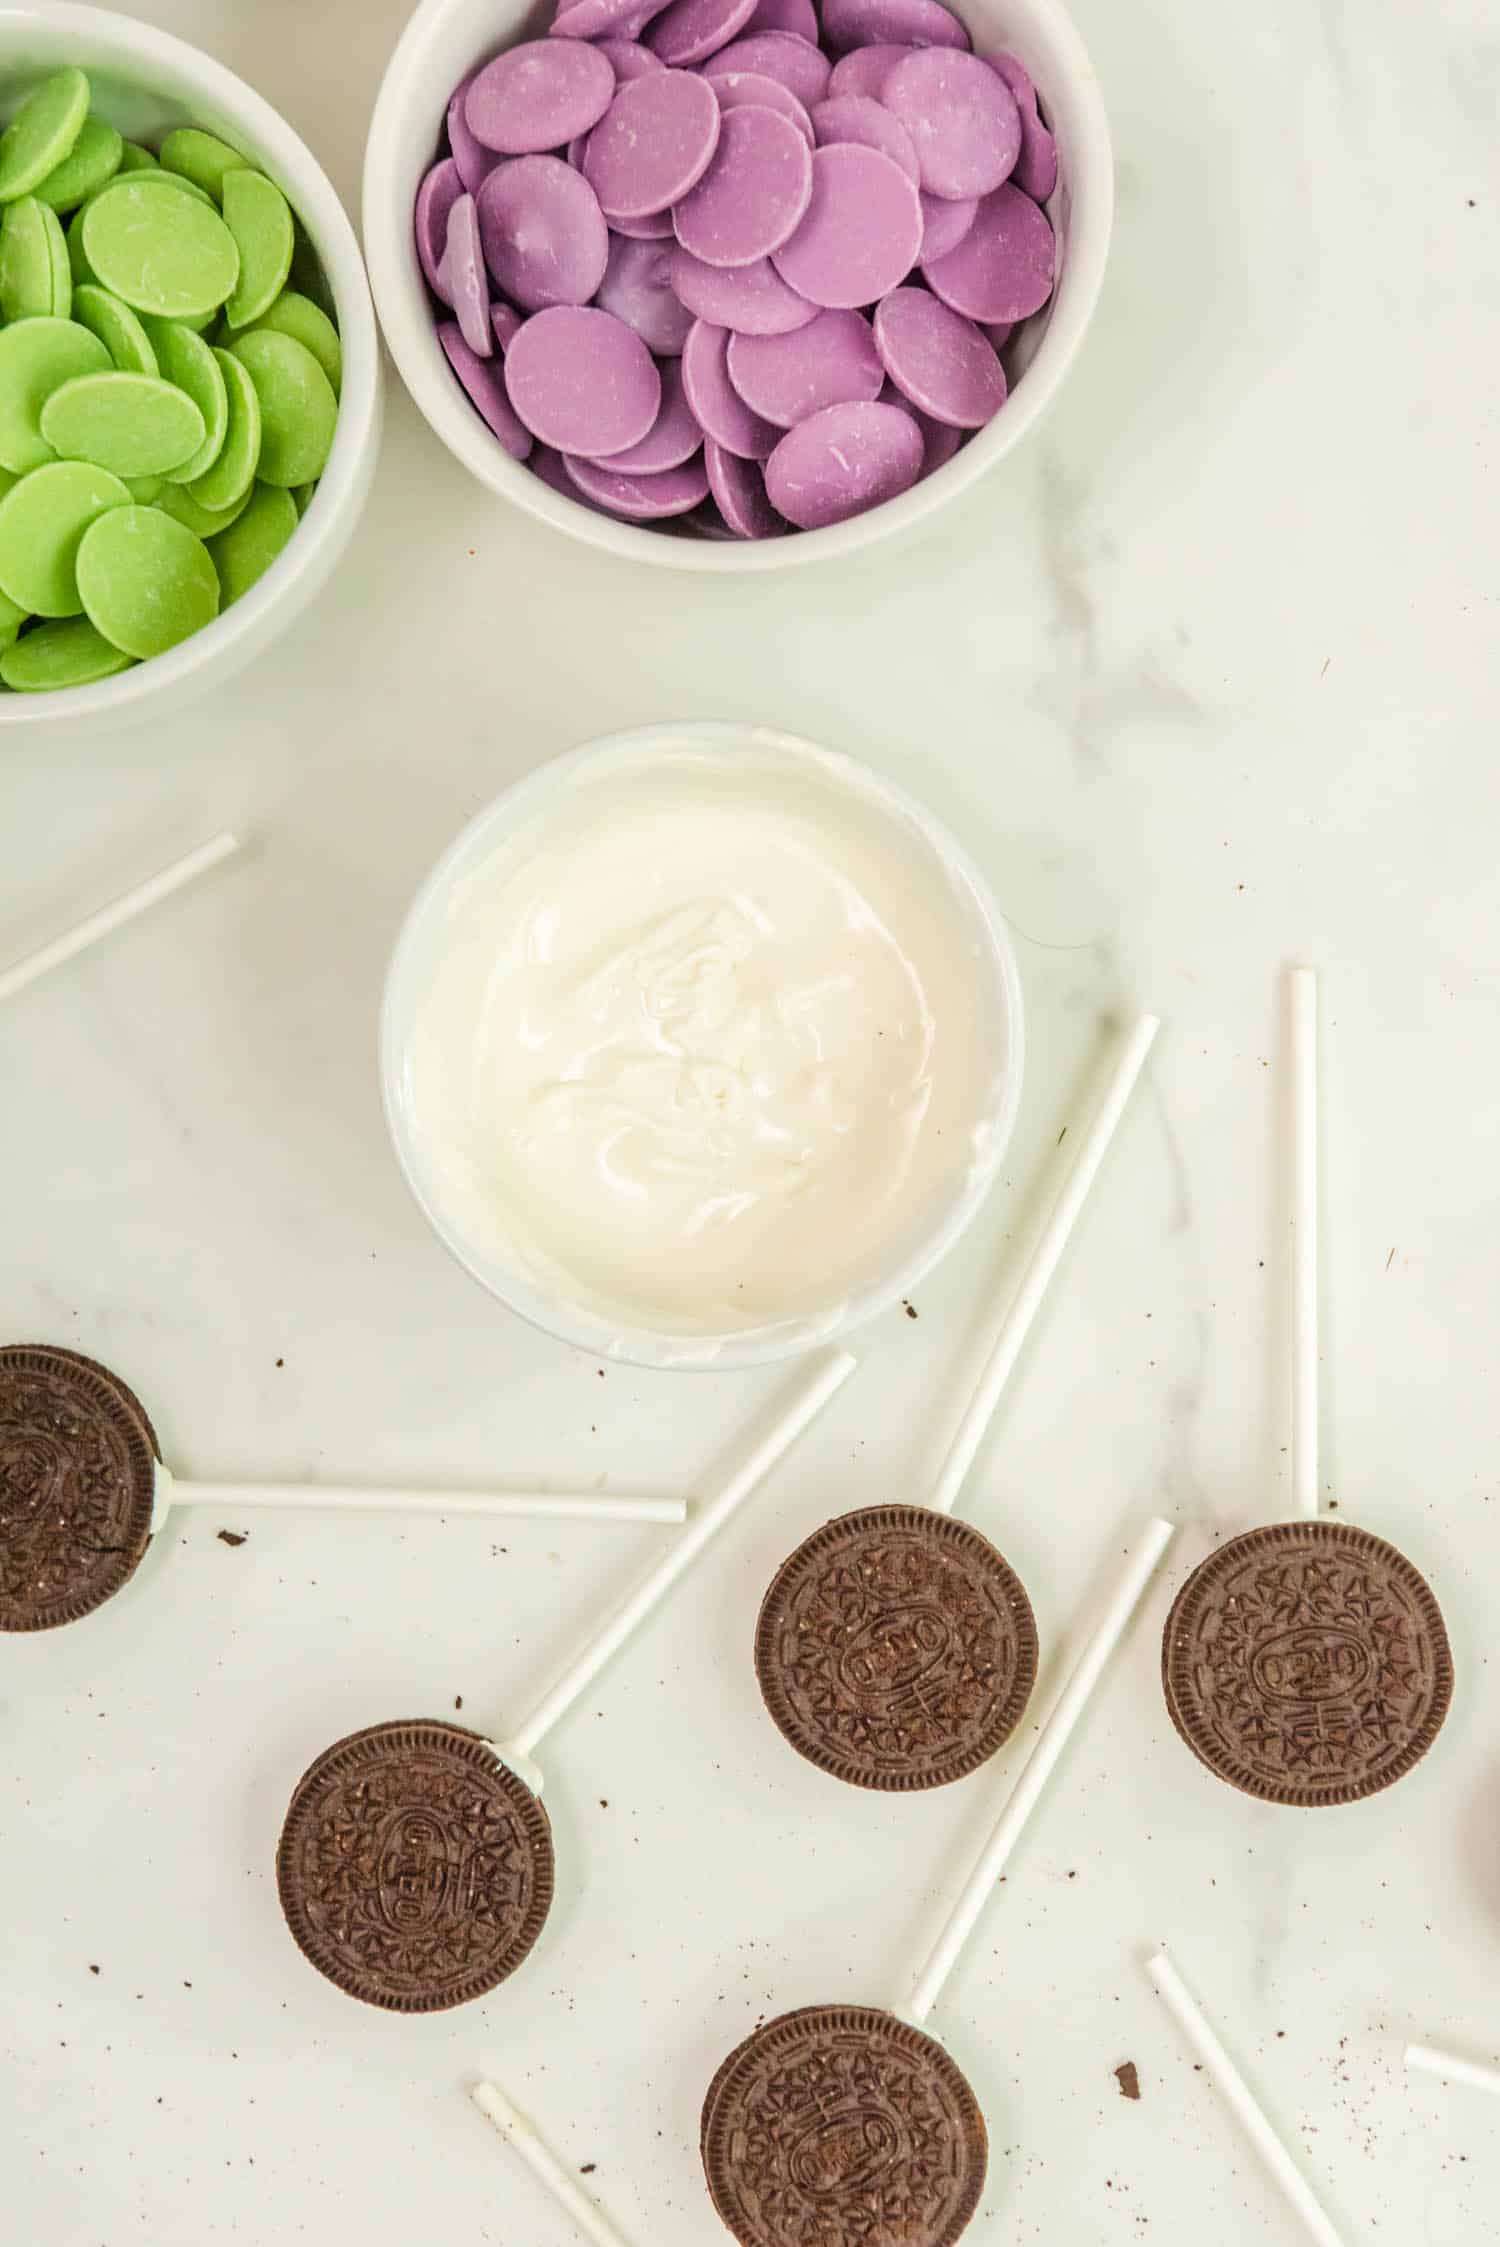 Dip the Cake Pop Sticks into the Melted White Wafers and Stick them into the Oreo Holes.